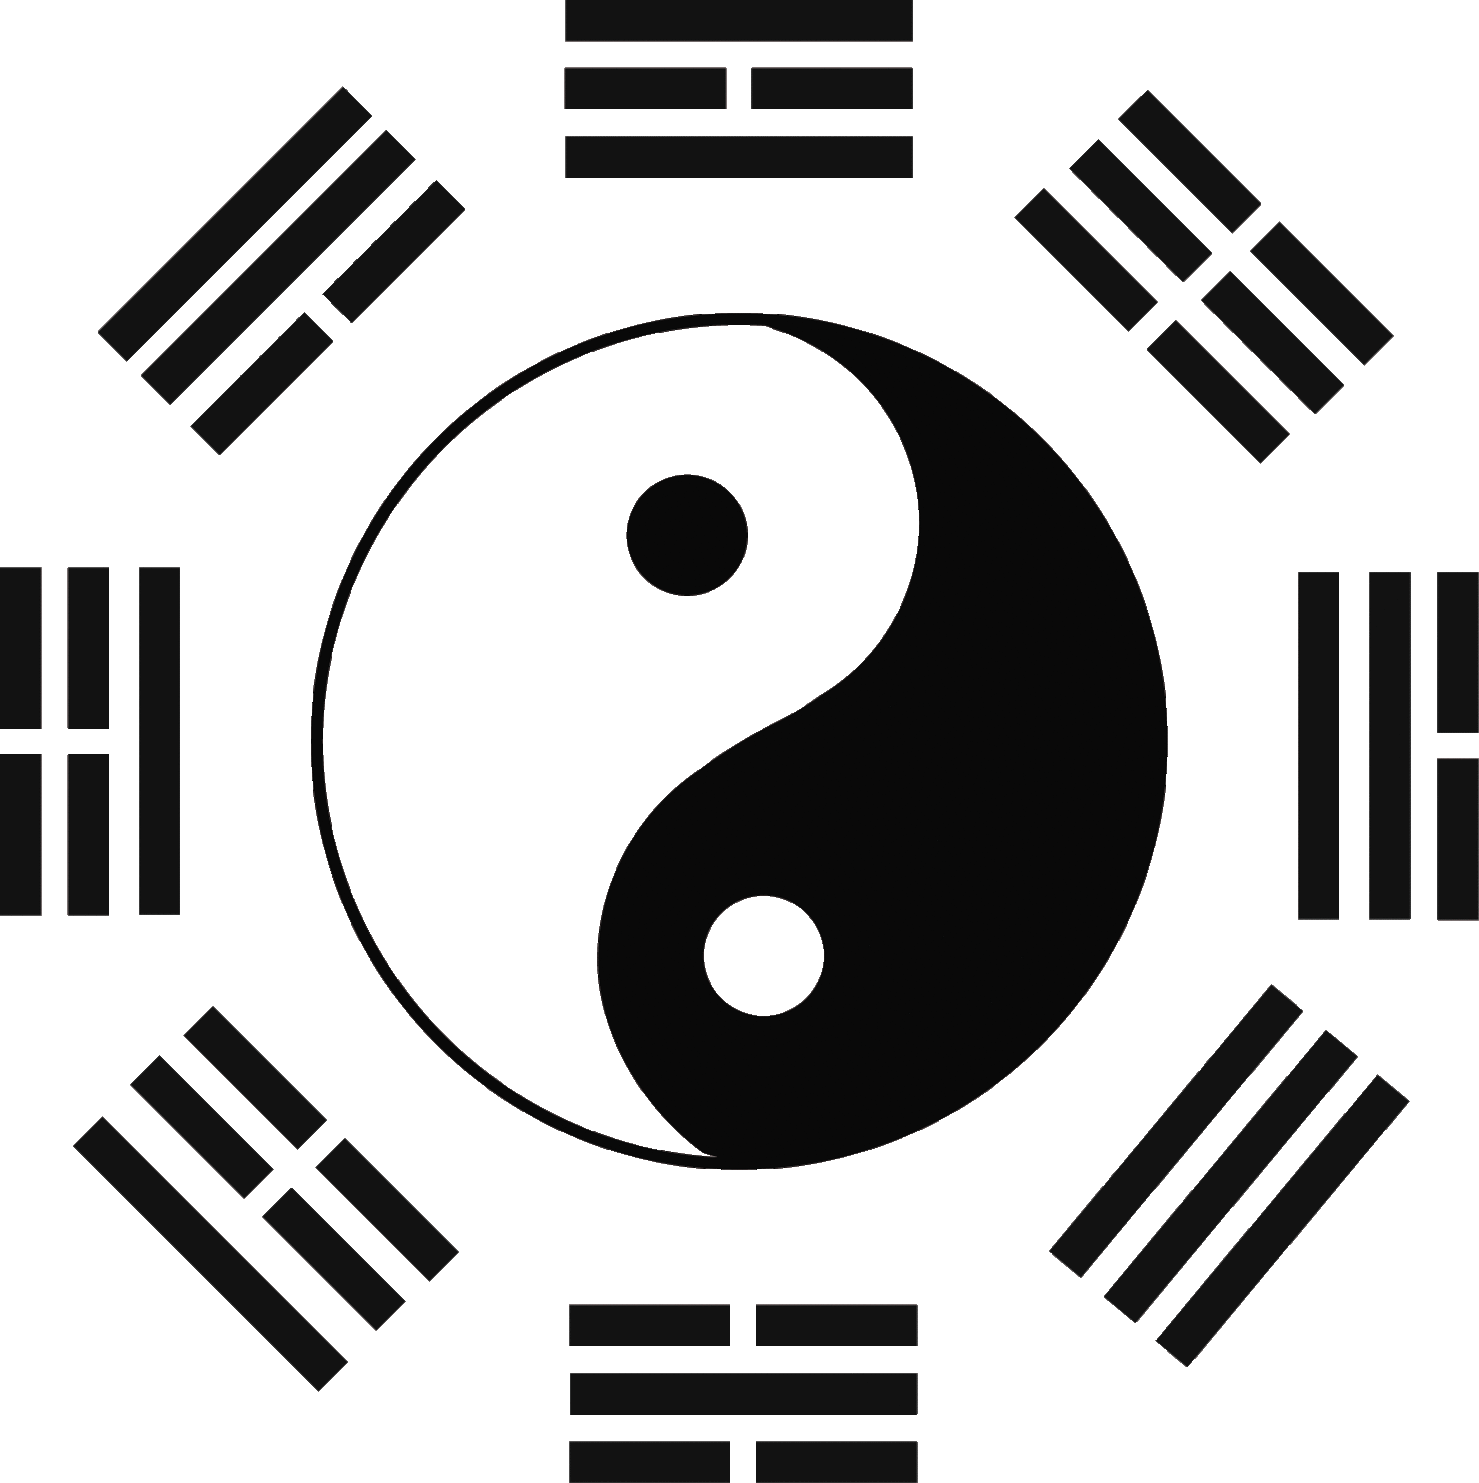 Yin yang images clipart free to use clip art resource